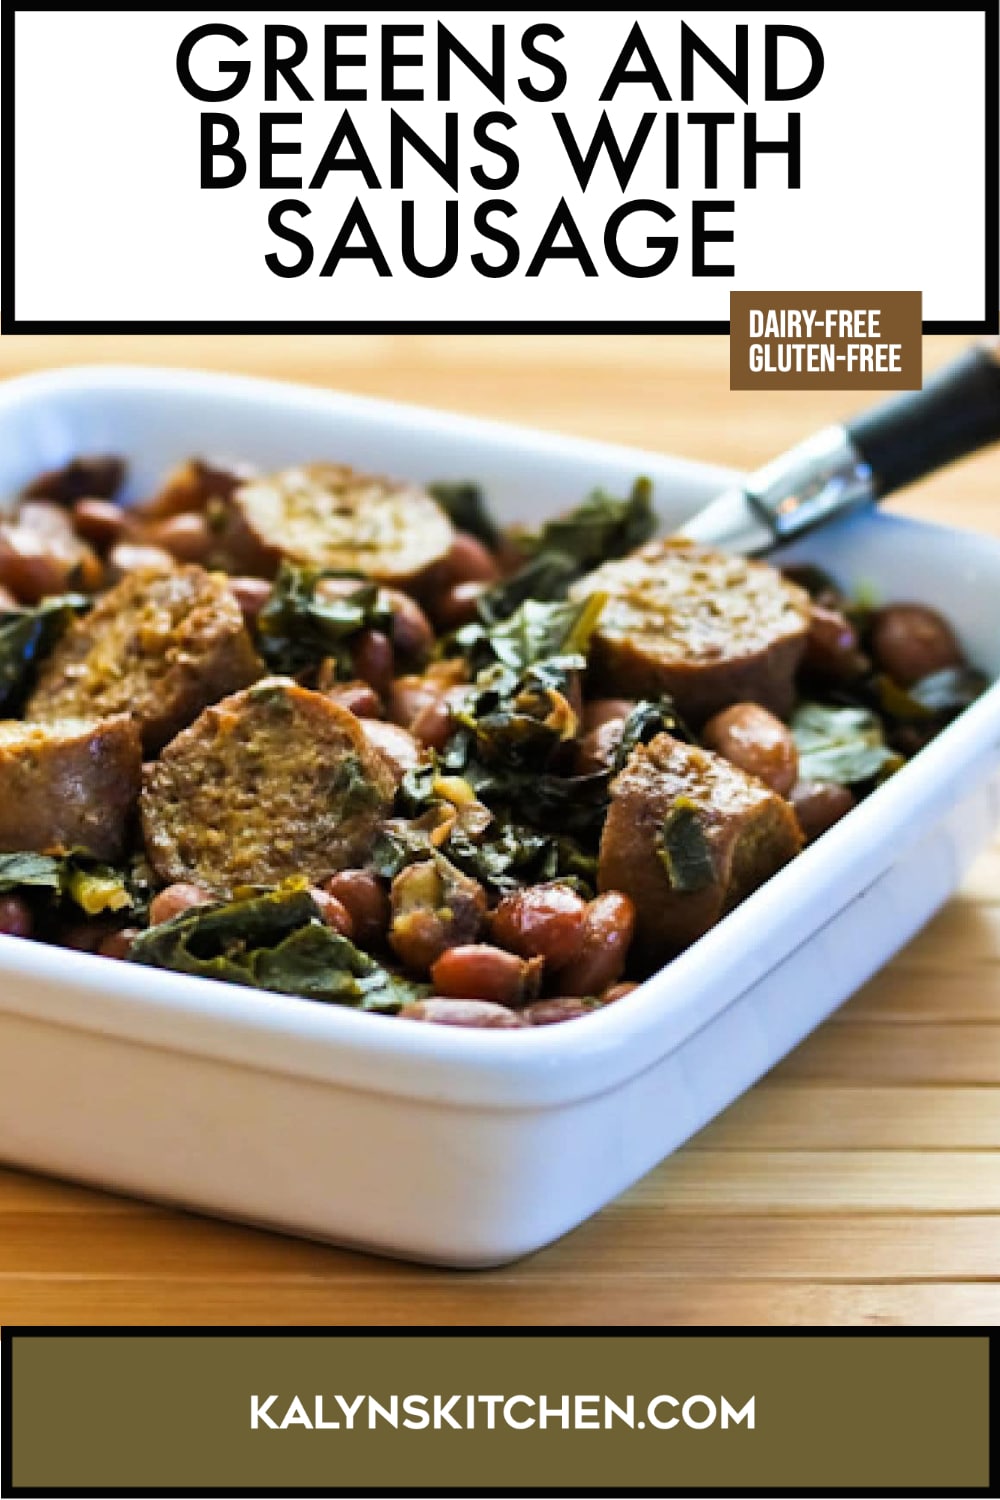 Pinterest image of Greens and Beans with Sausage